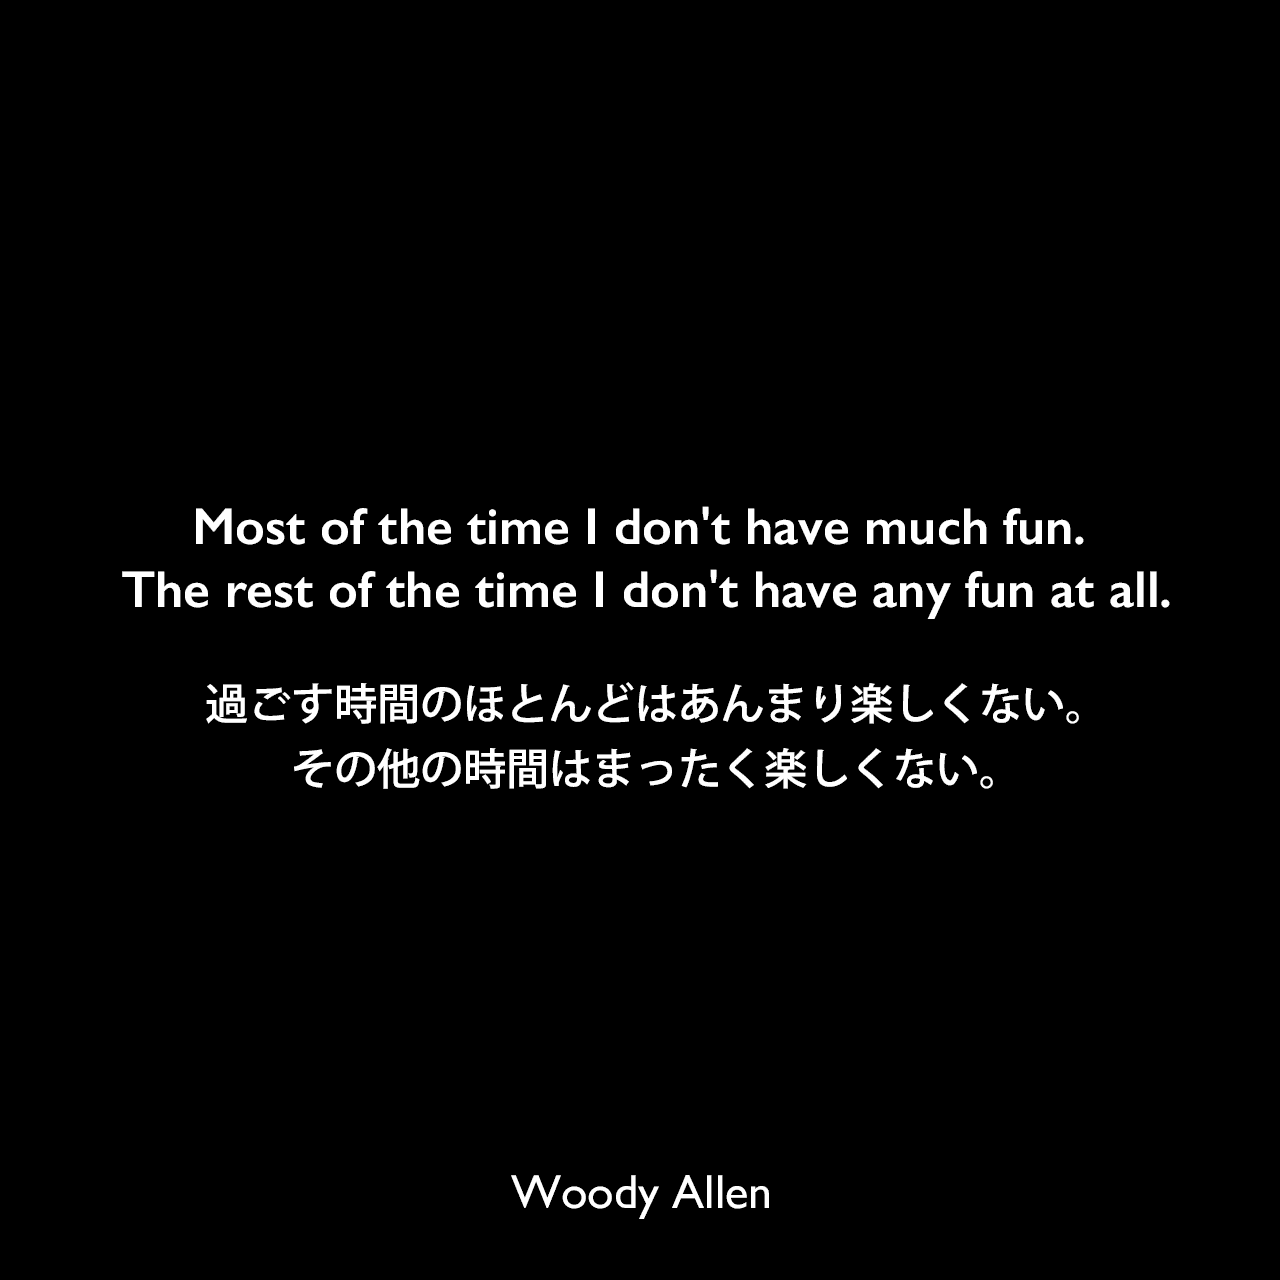 Most of the time I don't have much fun. The rest of the time I don't have any fun at all.過ごす時間のほとんどはあんまり楽しくない。その他の時間はまったく楽しくない。Woody Allen